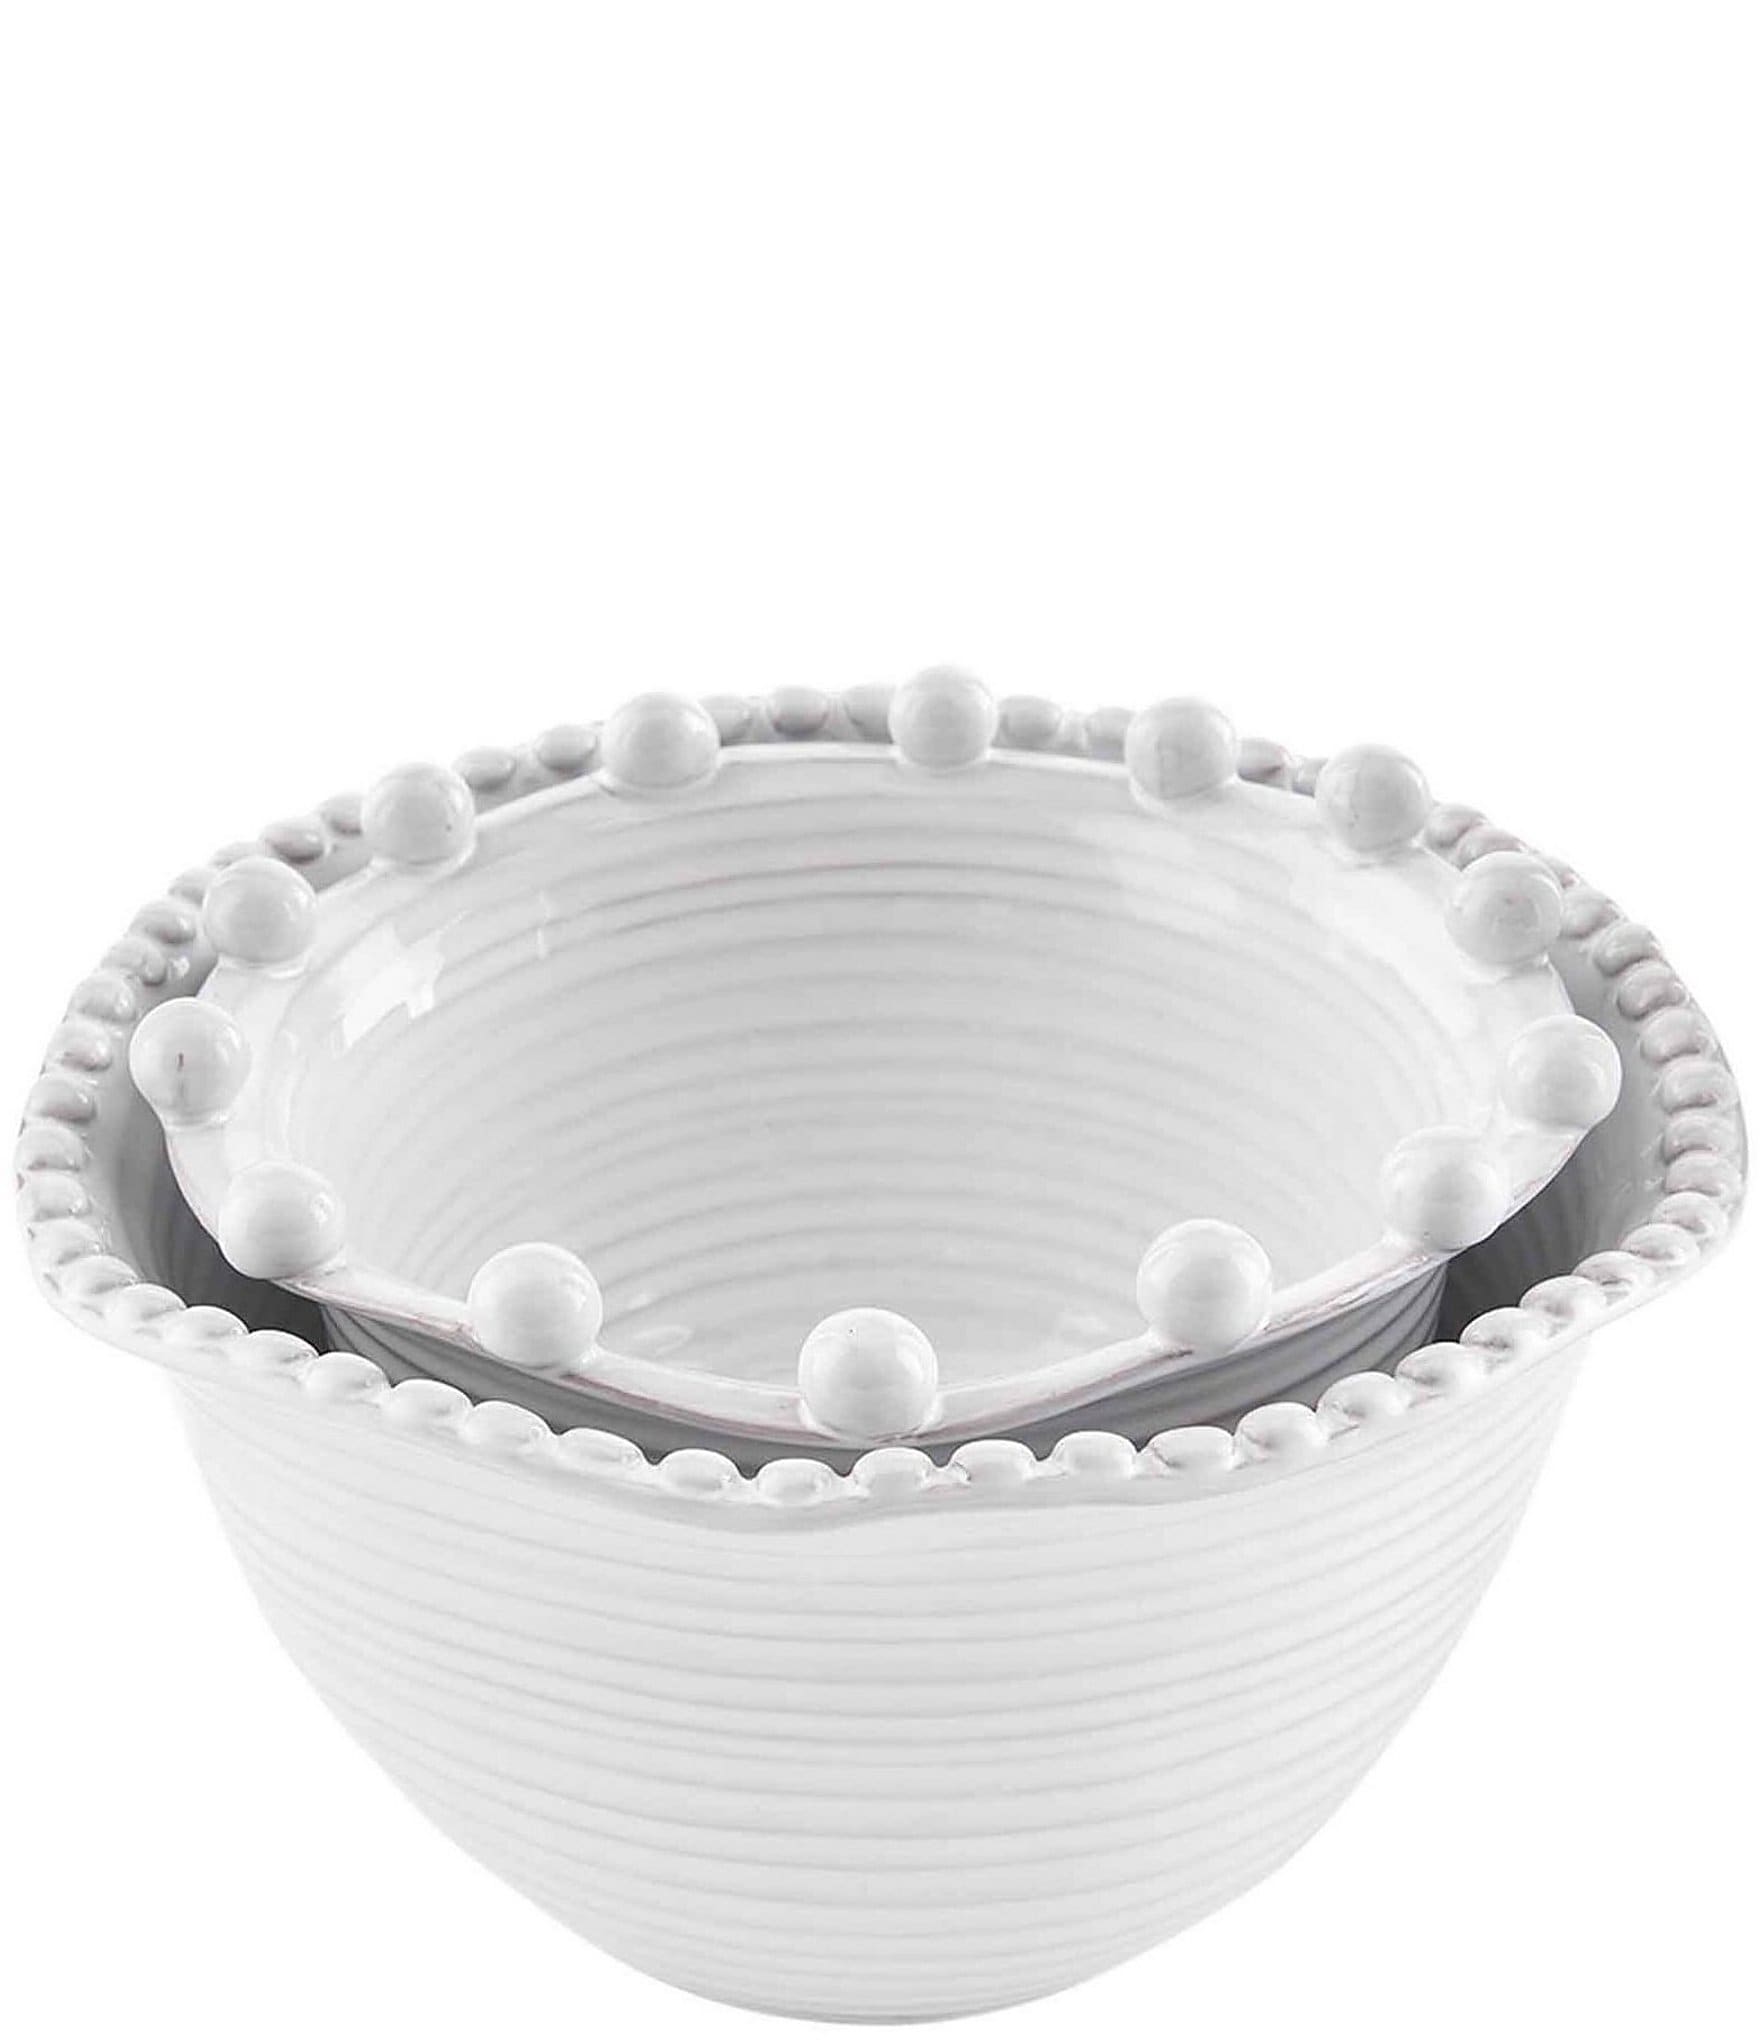 Mud Pie 46000097 Farmhouse Inspired Set with Spoon Vegetable Serving Dish One size White 